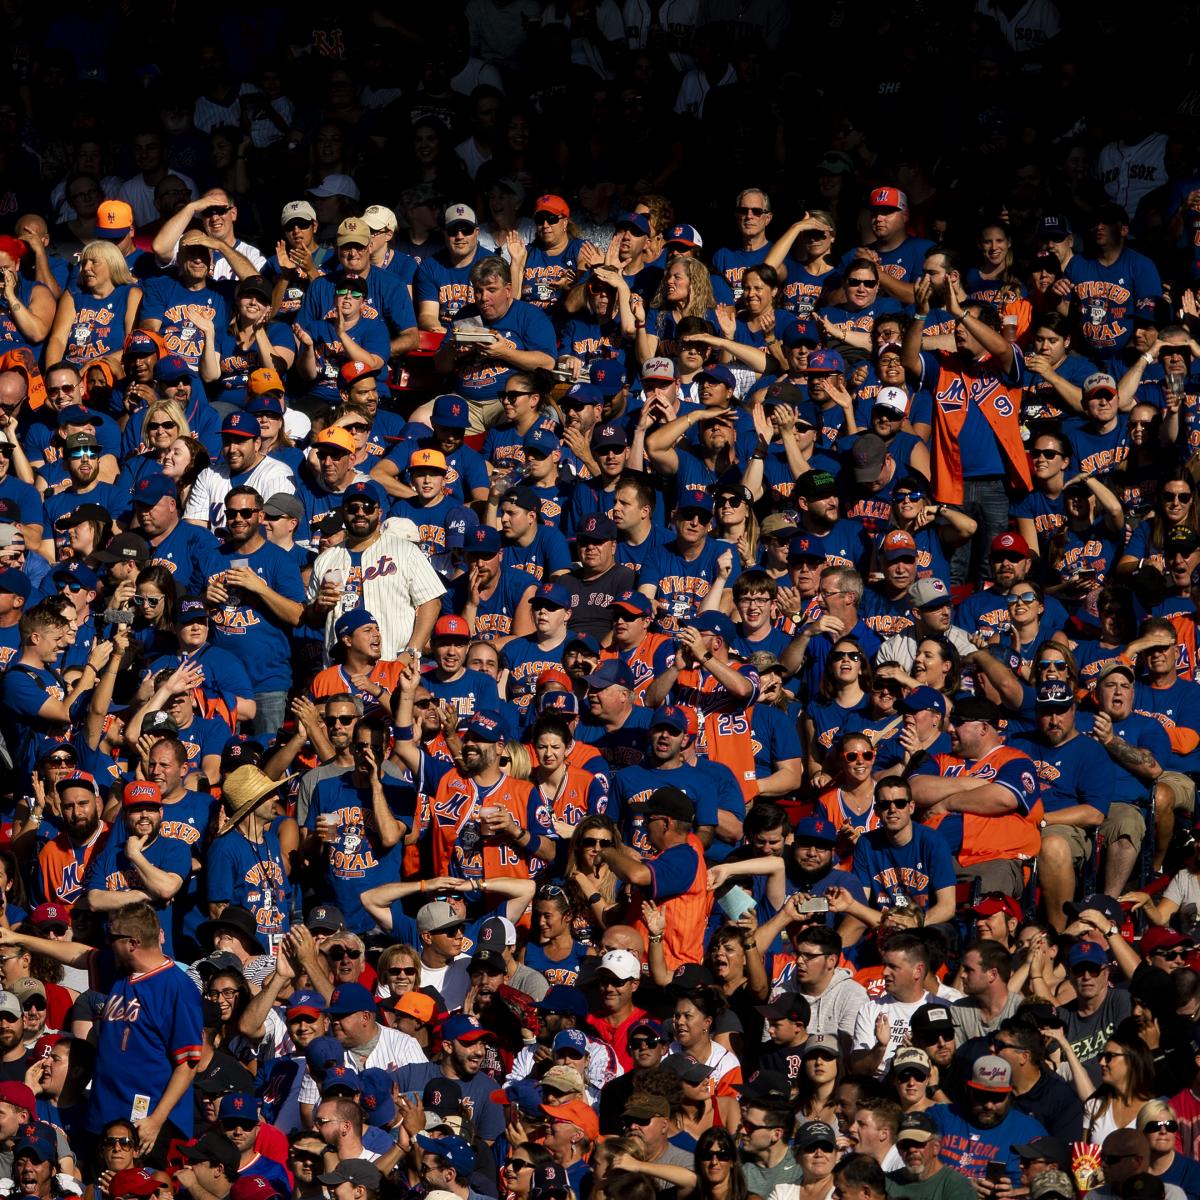 The 7 Line - For Mets fans, by Mets fans